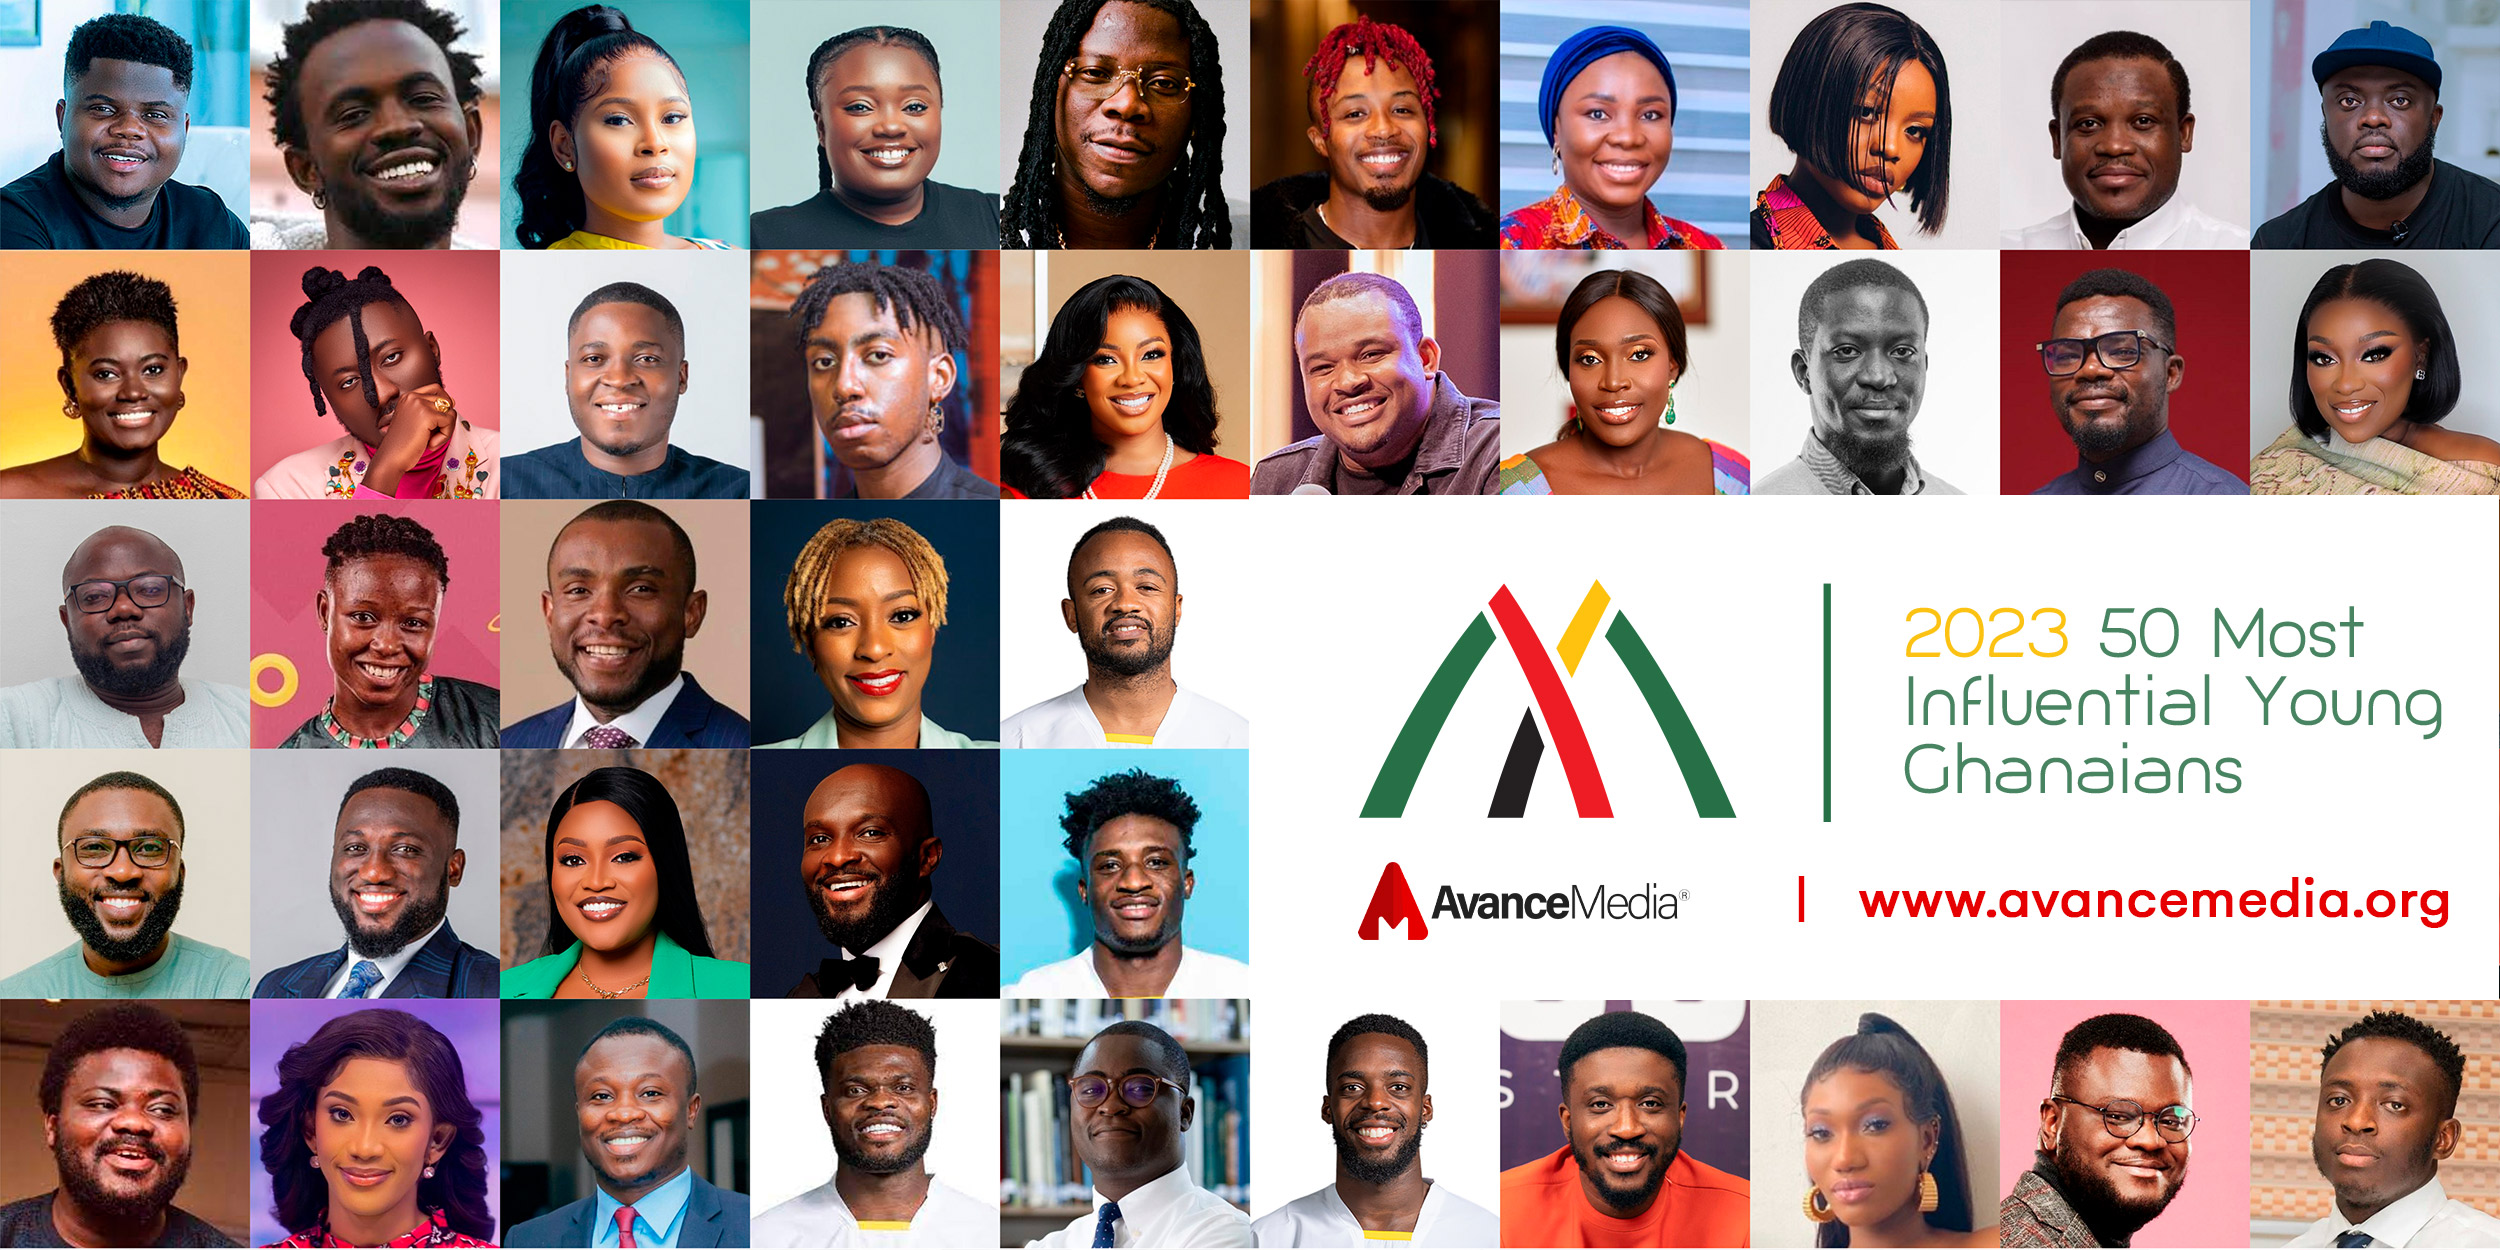 Avance Media’s 2023 50 Most Influential Young Ghanaians List